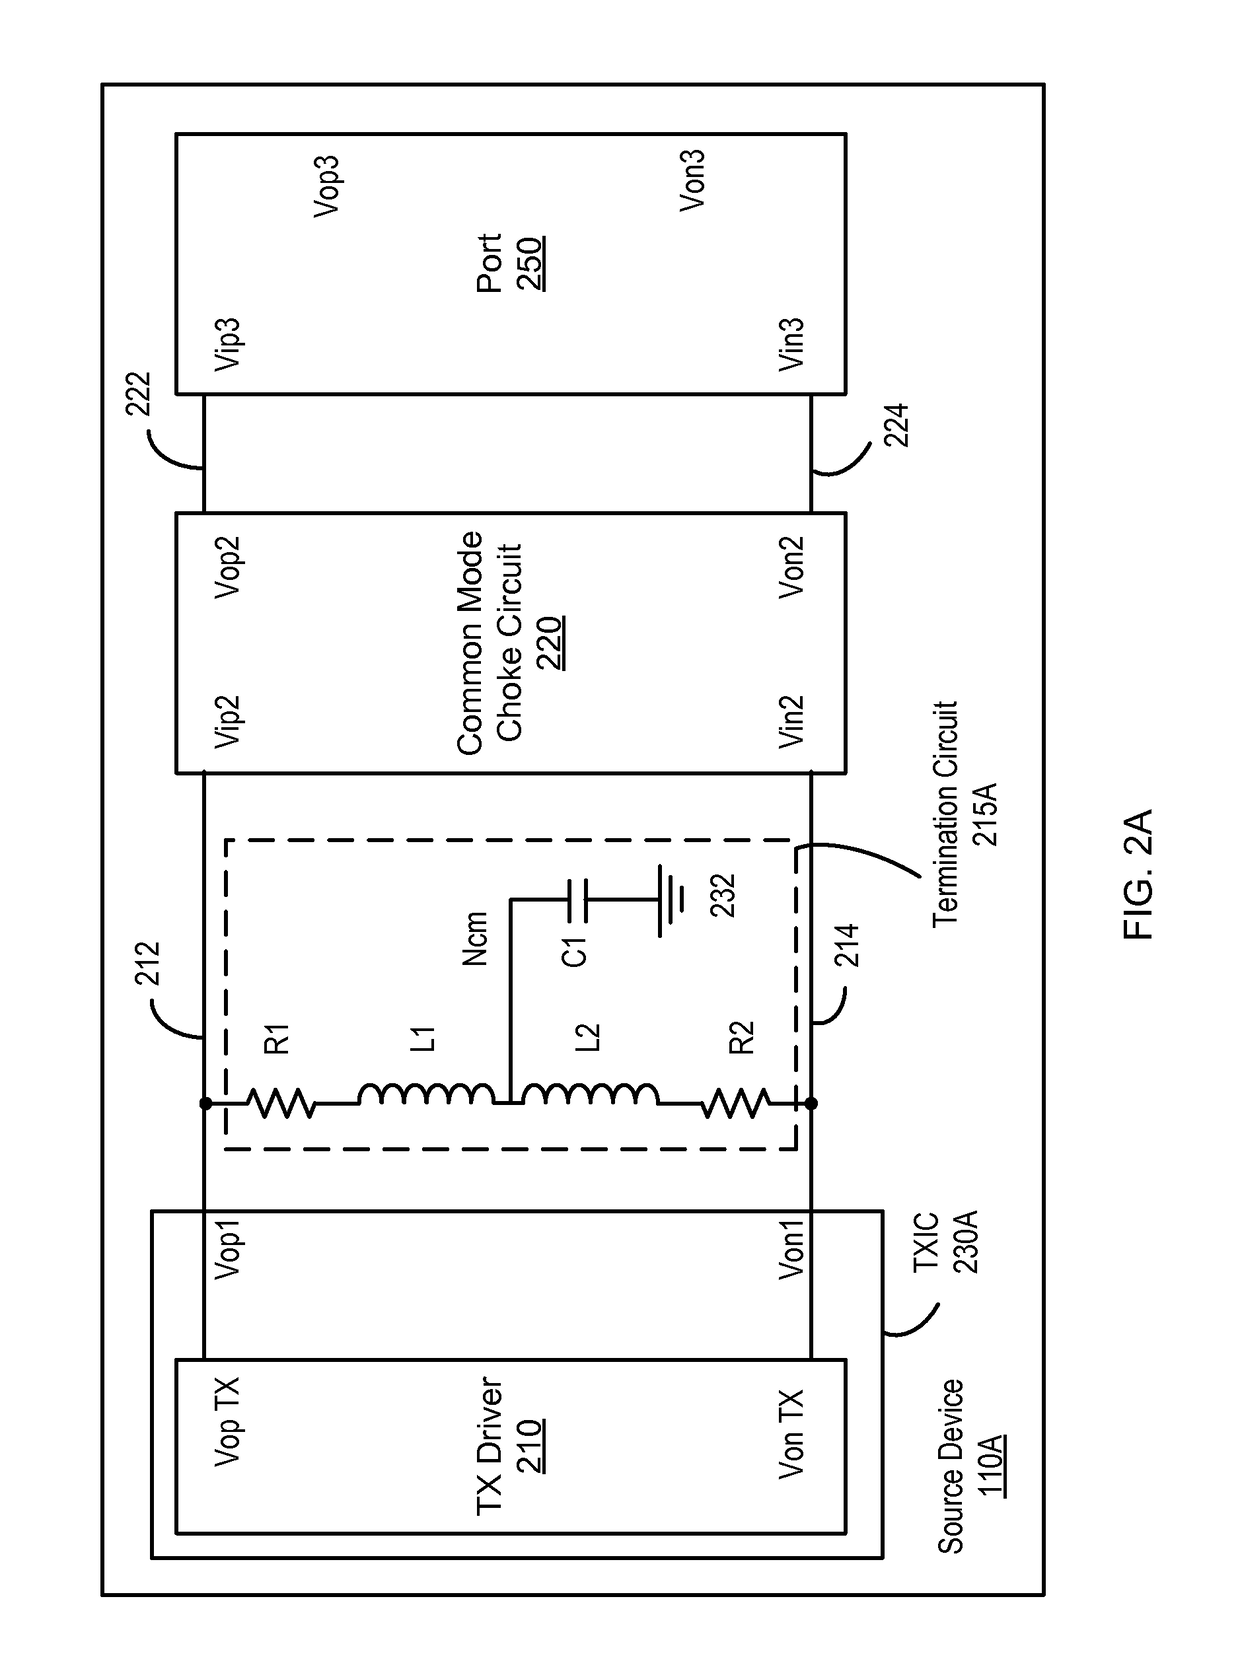 Transmitting apparatus with source termination